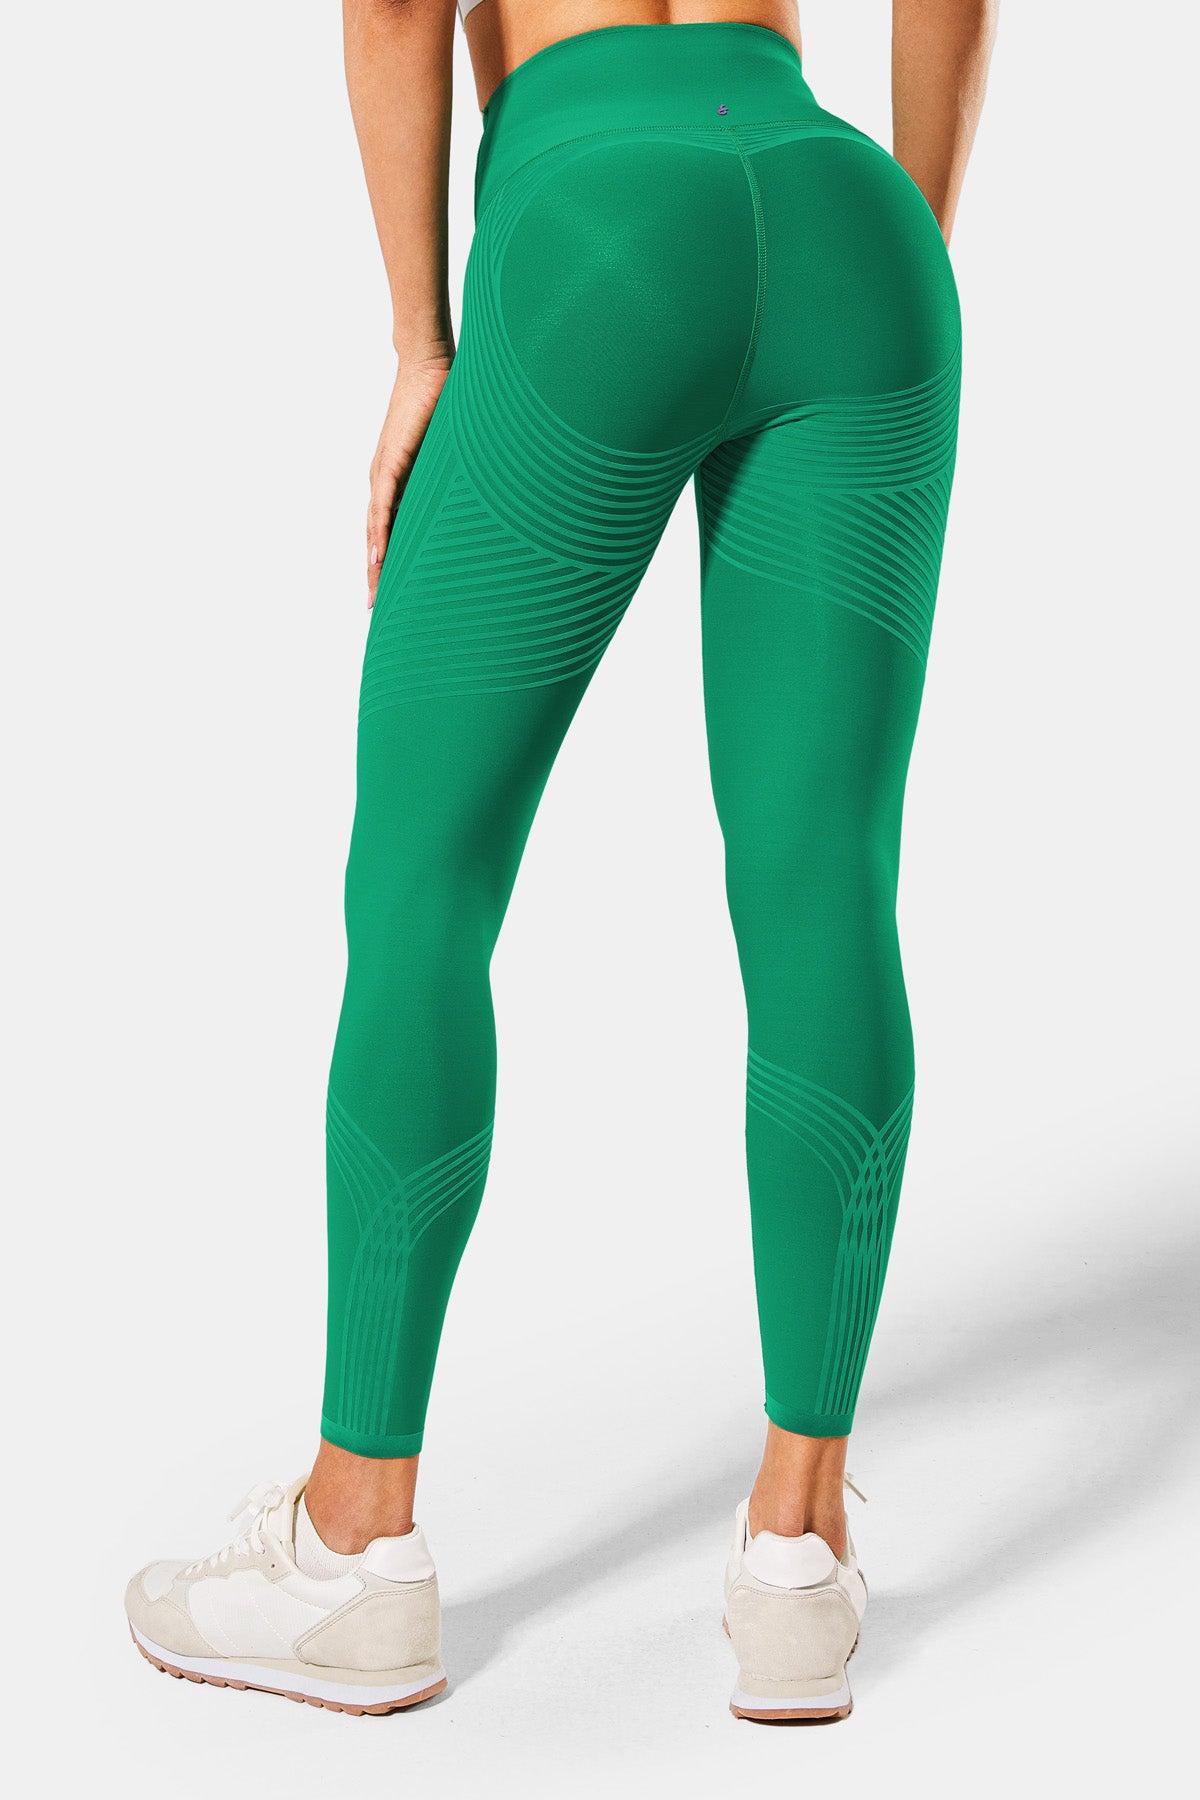 In case you were wondering — when we say the Supersculpt Legging